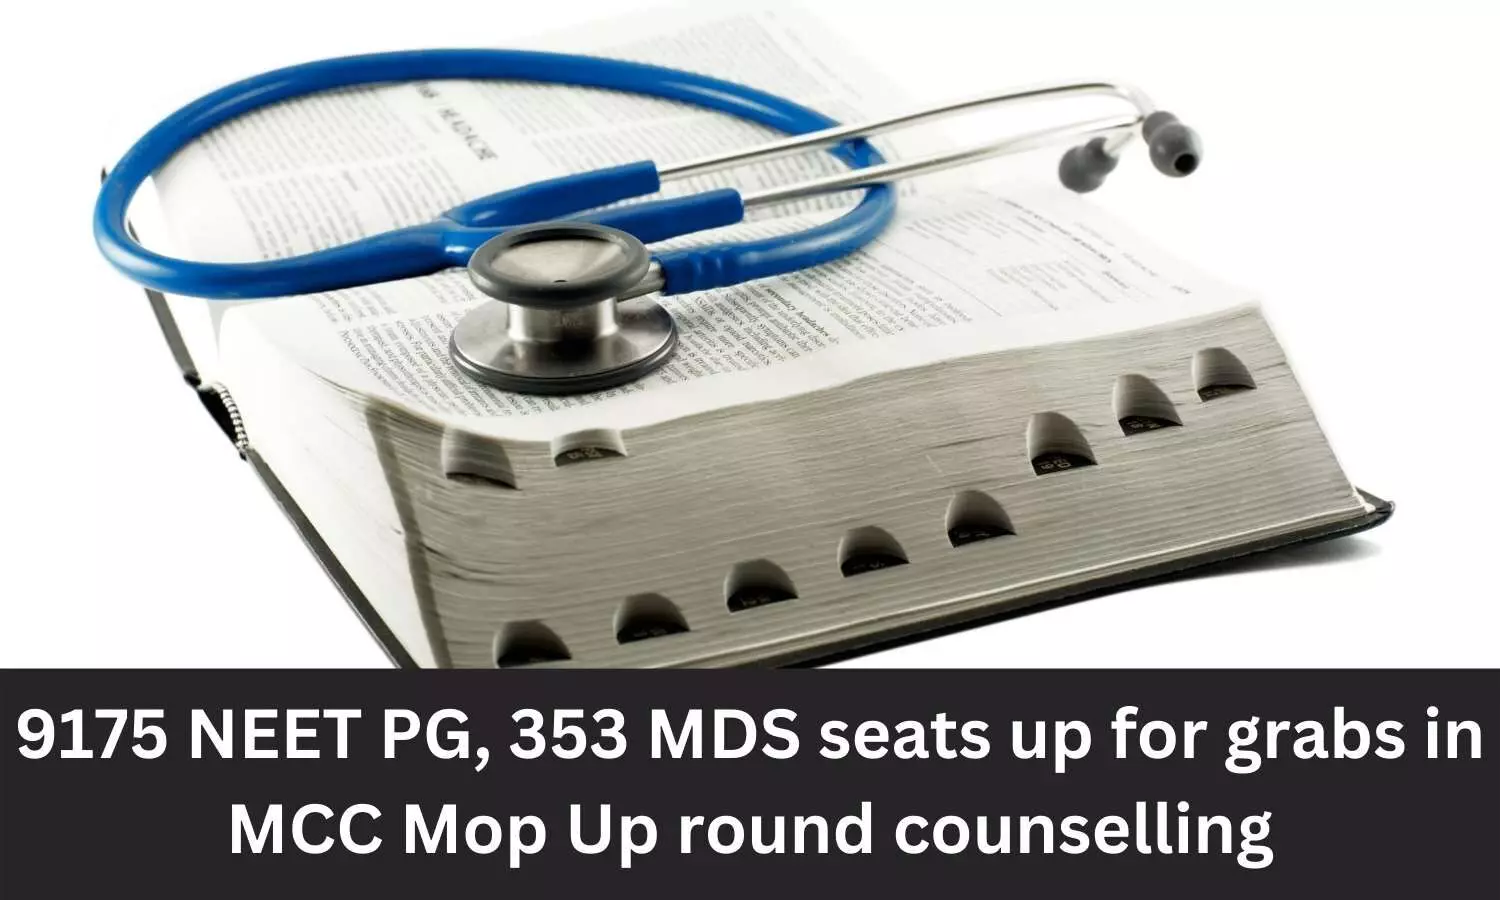 9175 NEET PG, 353 MDS seats up for grabs in MCC mop up round counselling